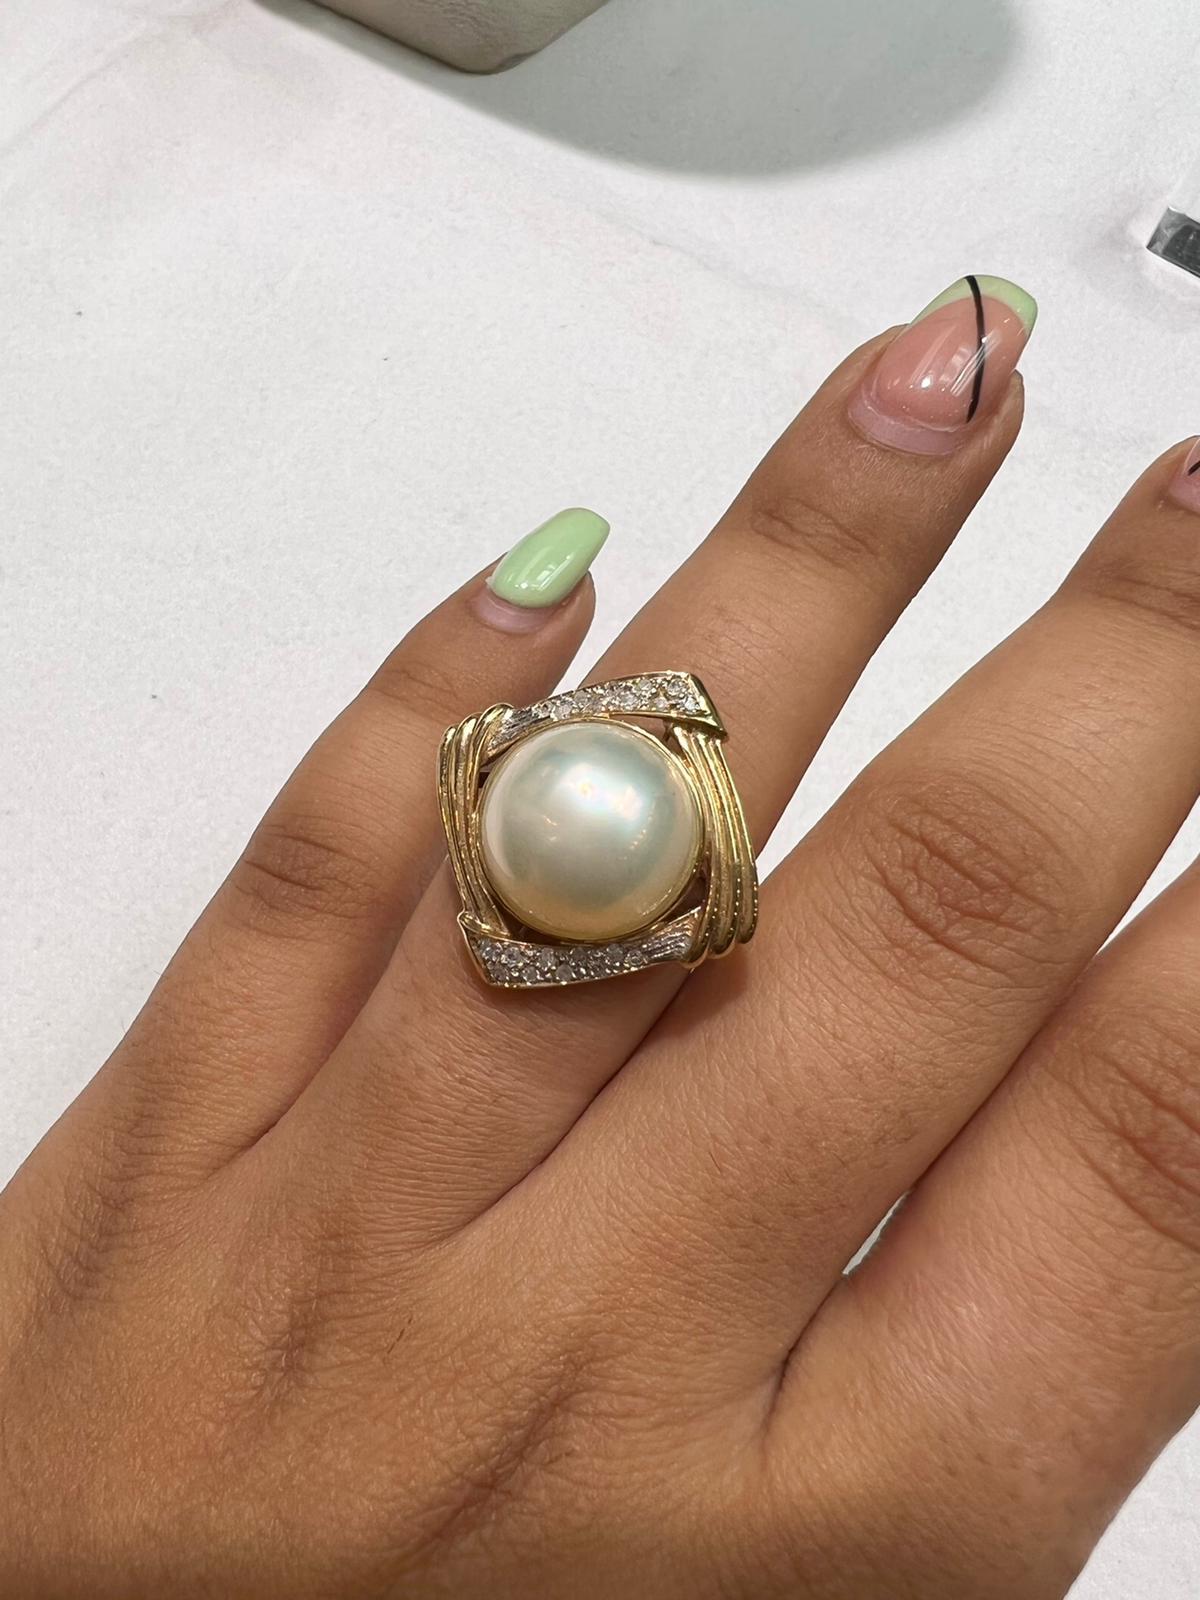 14X6mm Mabe pearl with 14k yellow gold ring with diamonds
A cultivated blister pearl that is produced differently than other cultured pearls is a mabe pearl. A 14*6mm mabe pearl is developed against the interior of the shell rather than inside the